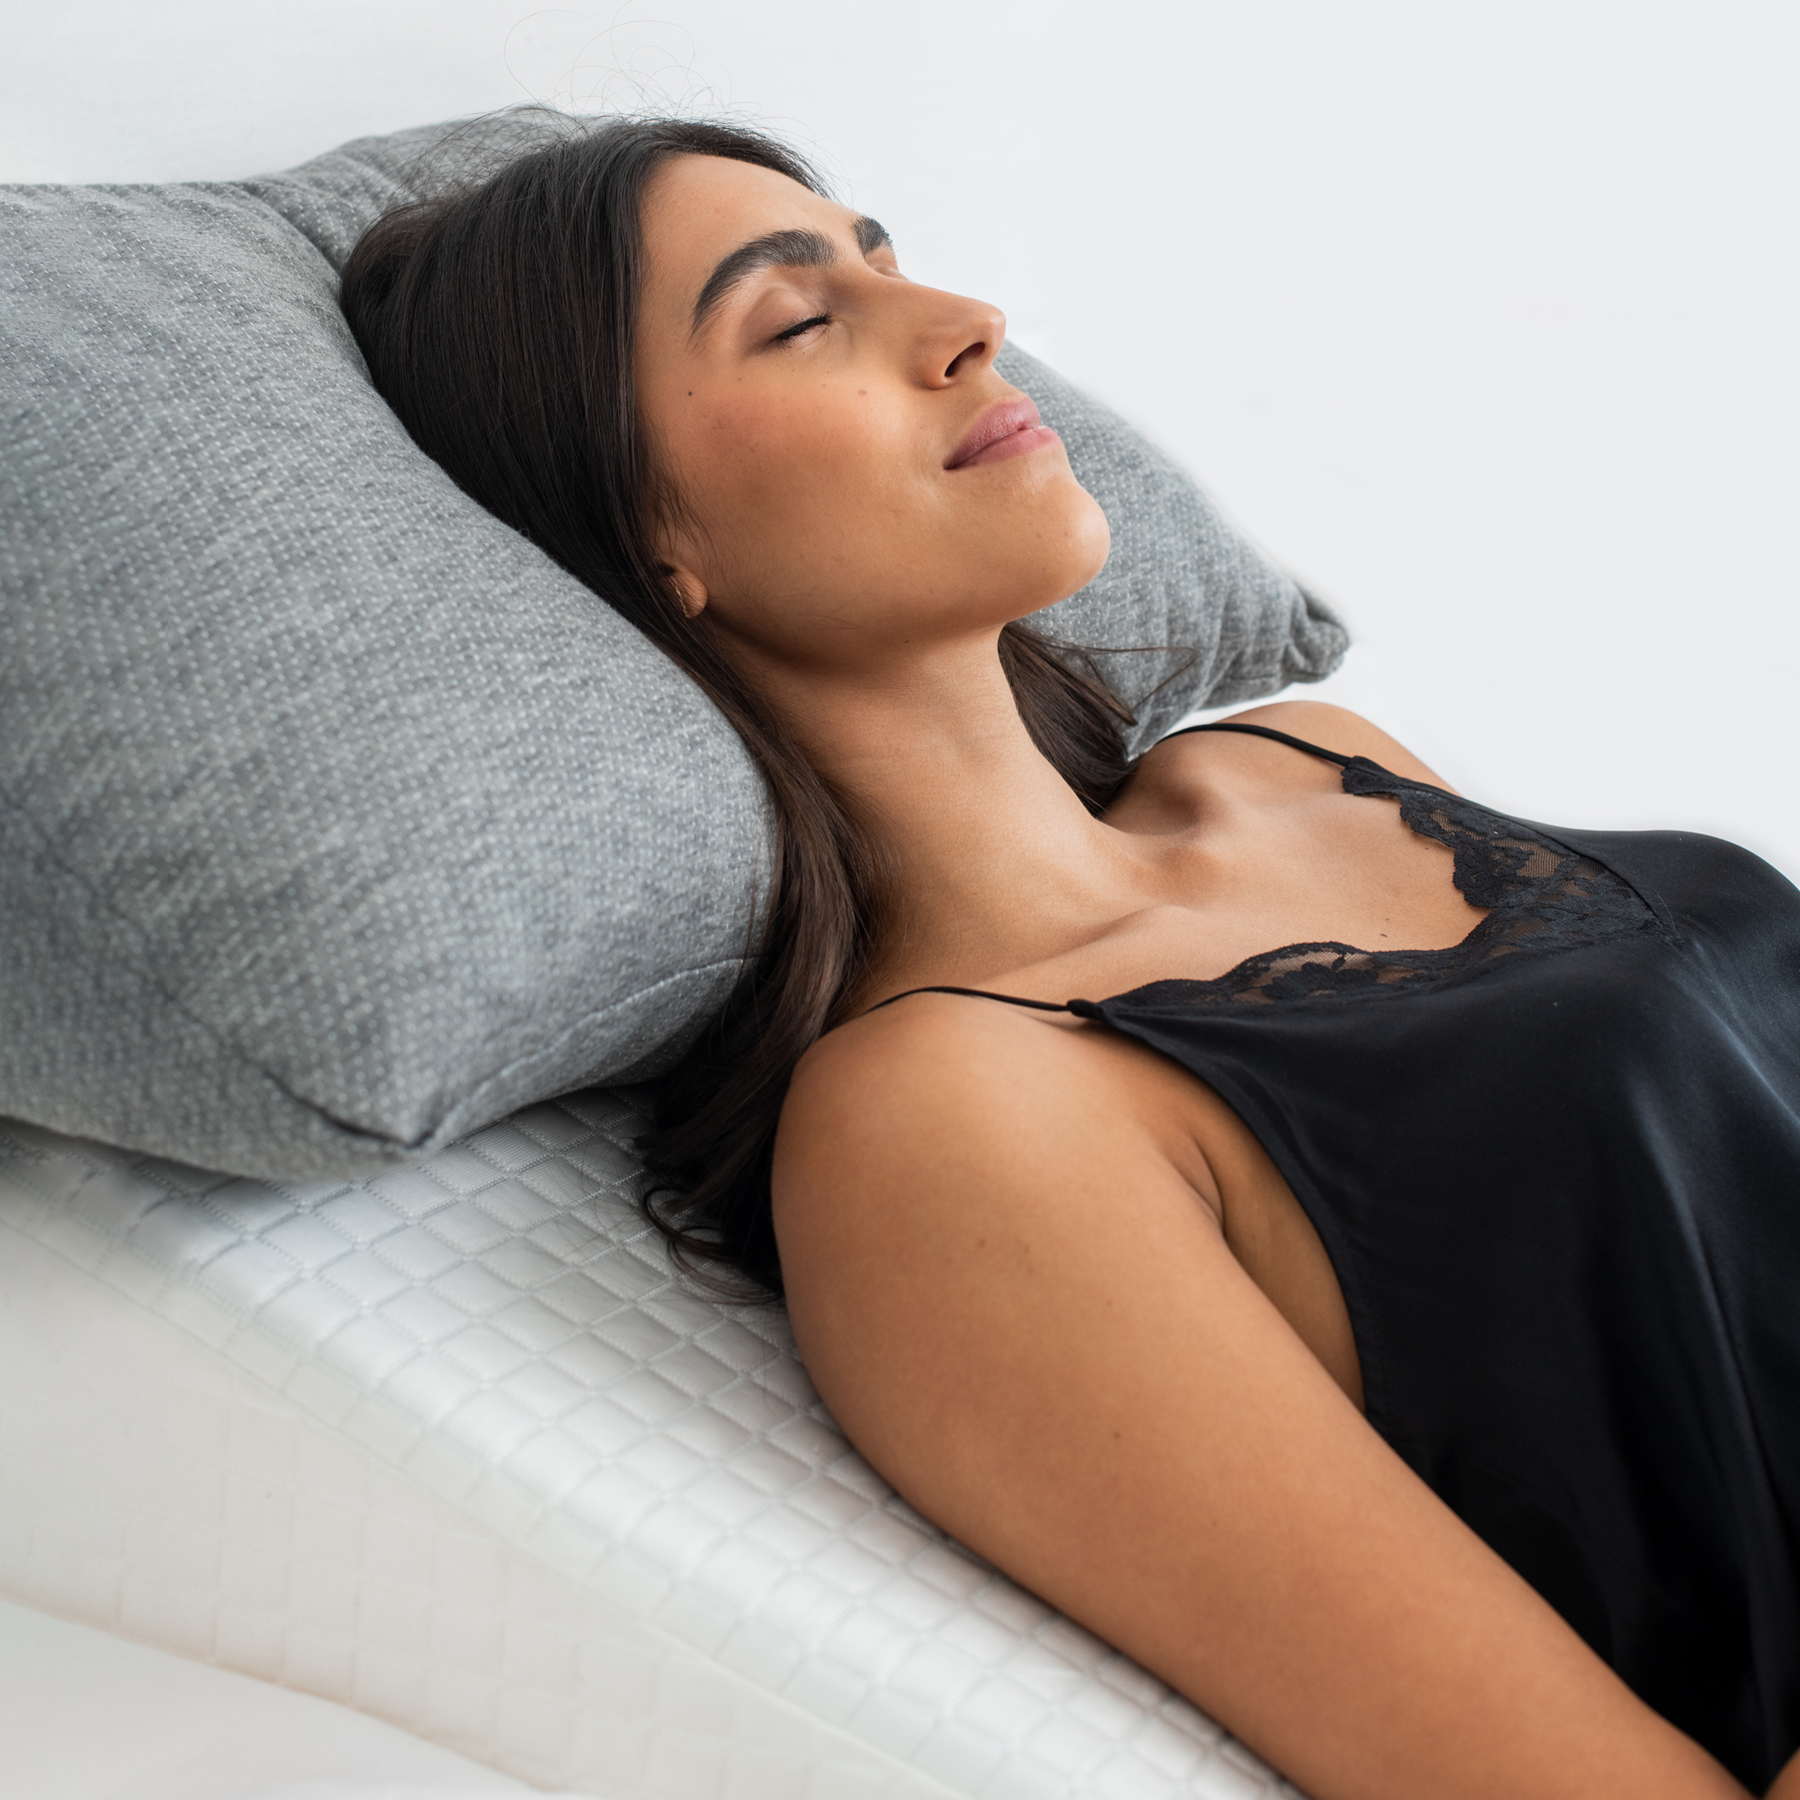 Shoppers Say This Wedge Pillow Relieves Neck and Back Pain